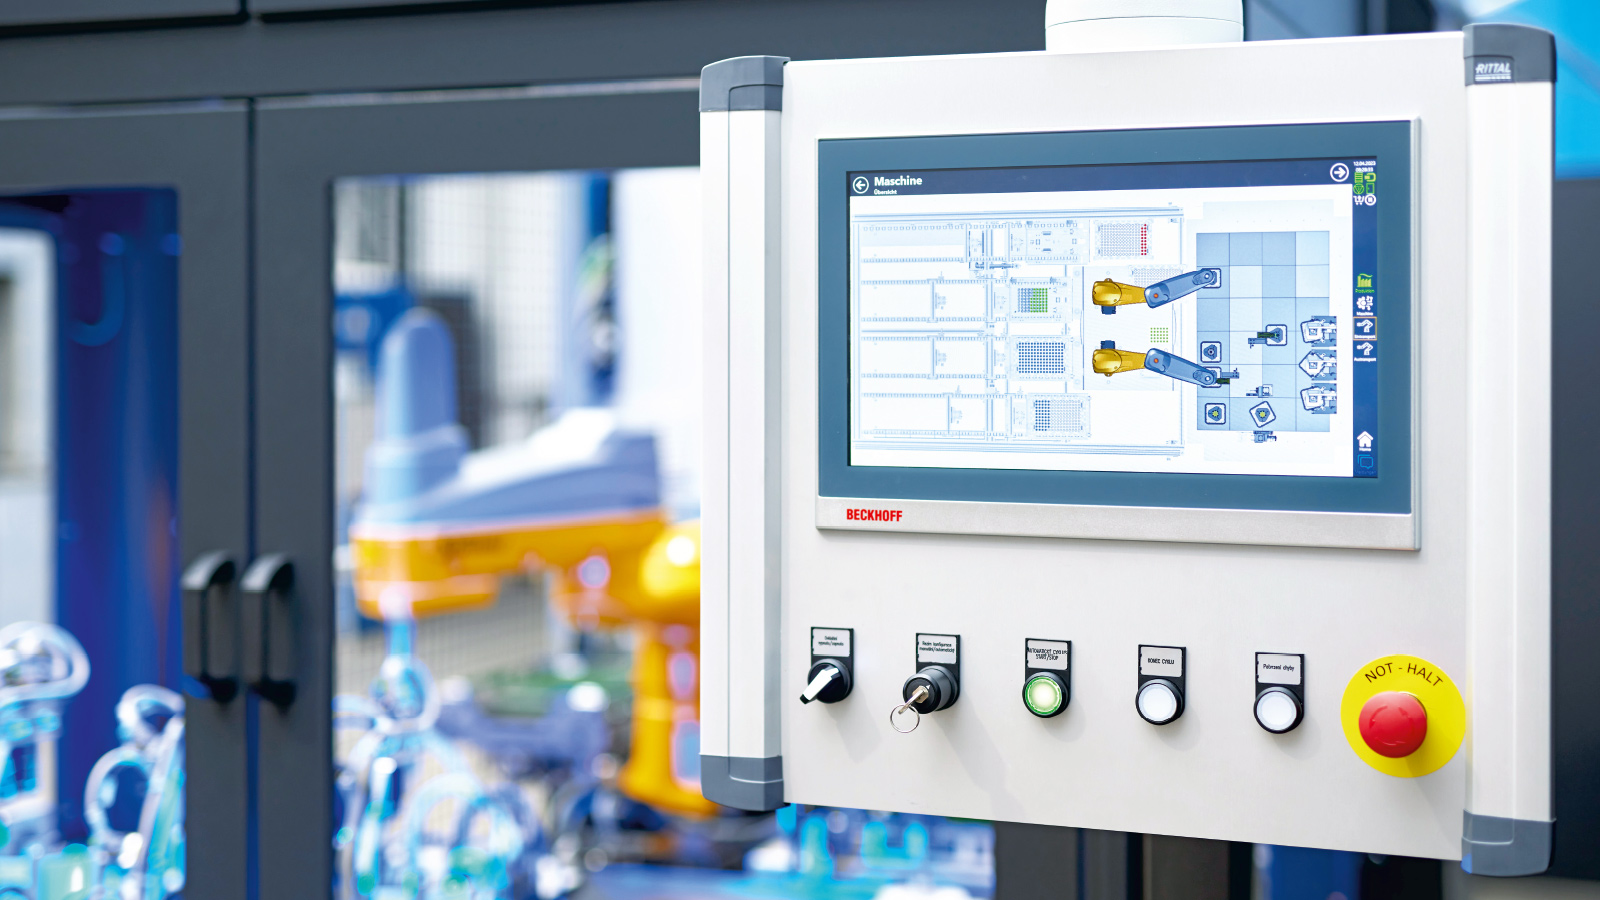 The multi-touch built-in Control Panel in the CP29xx series enables convenient machine operation and process control.